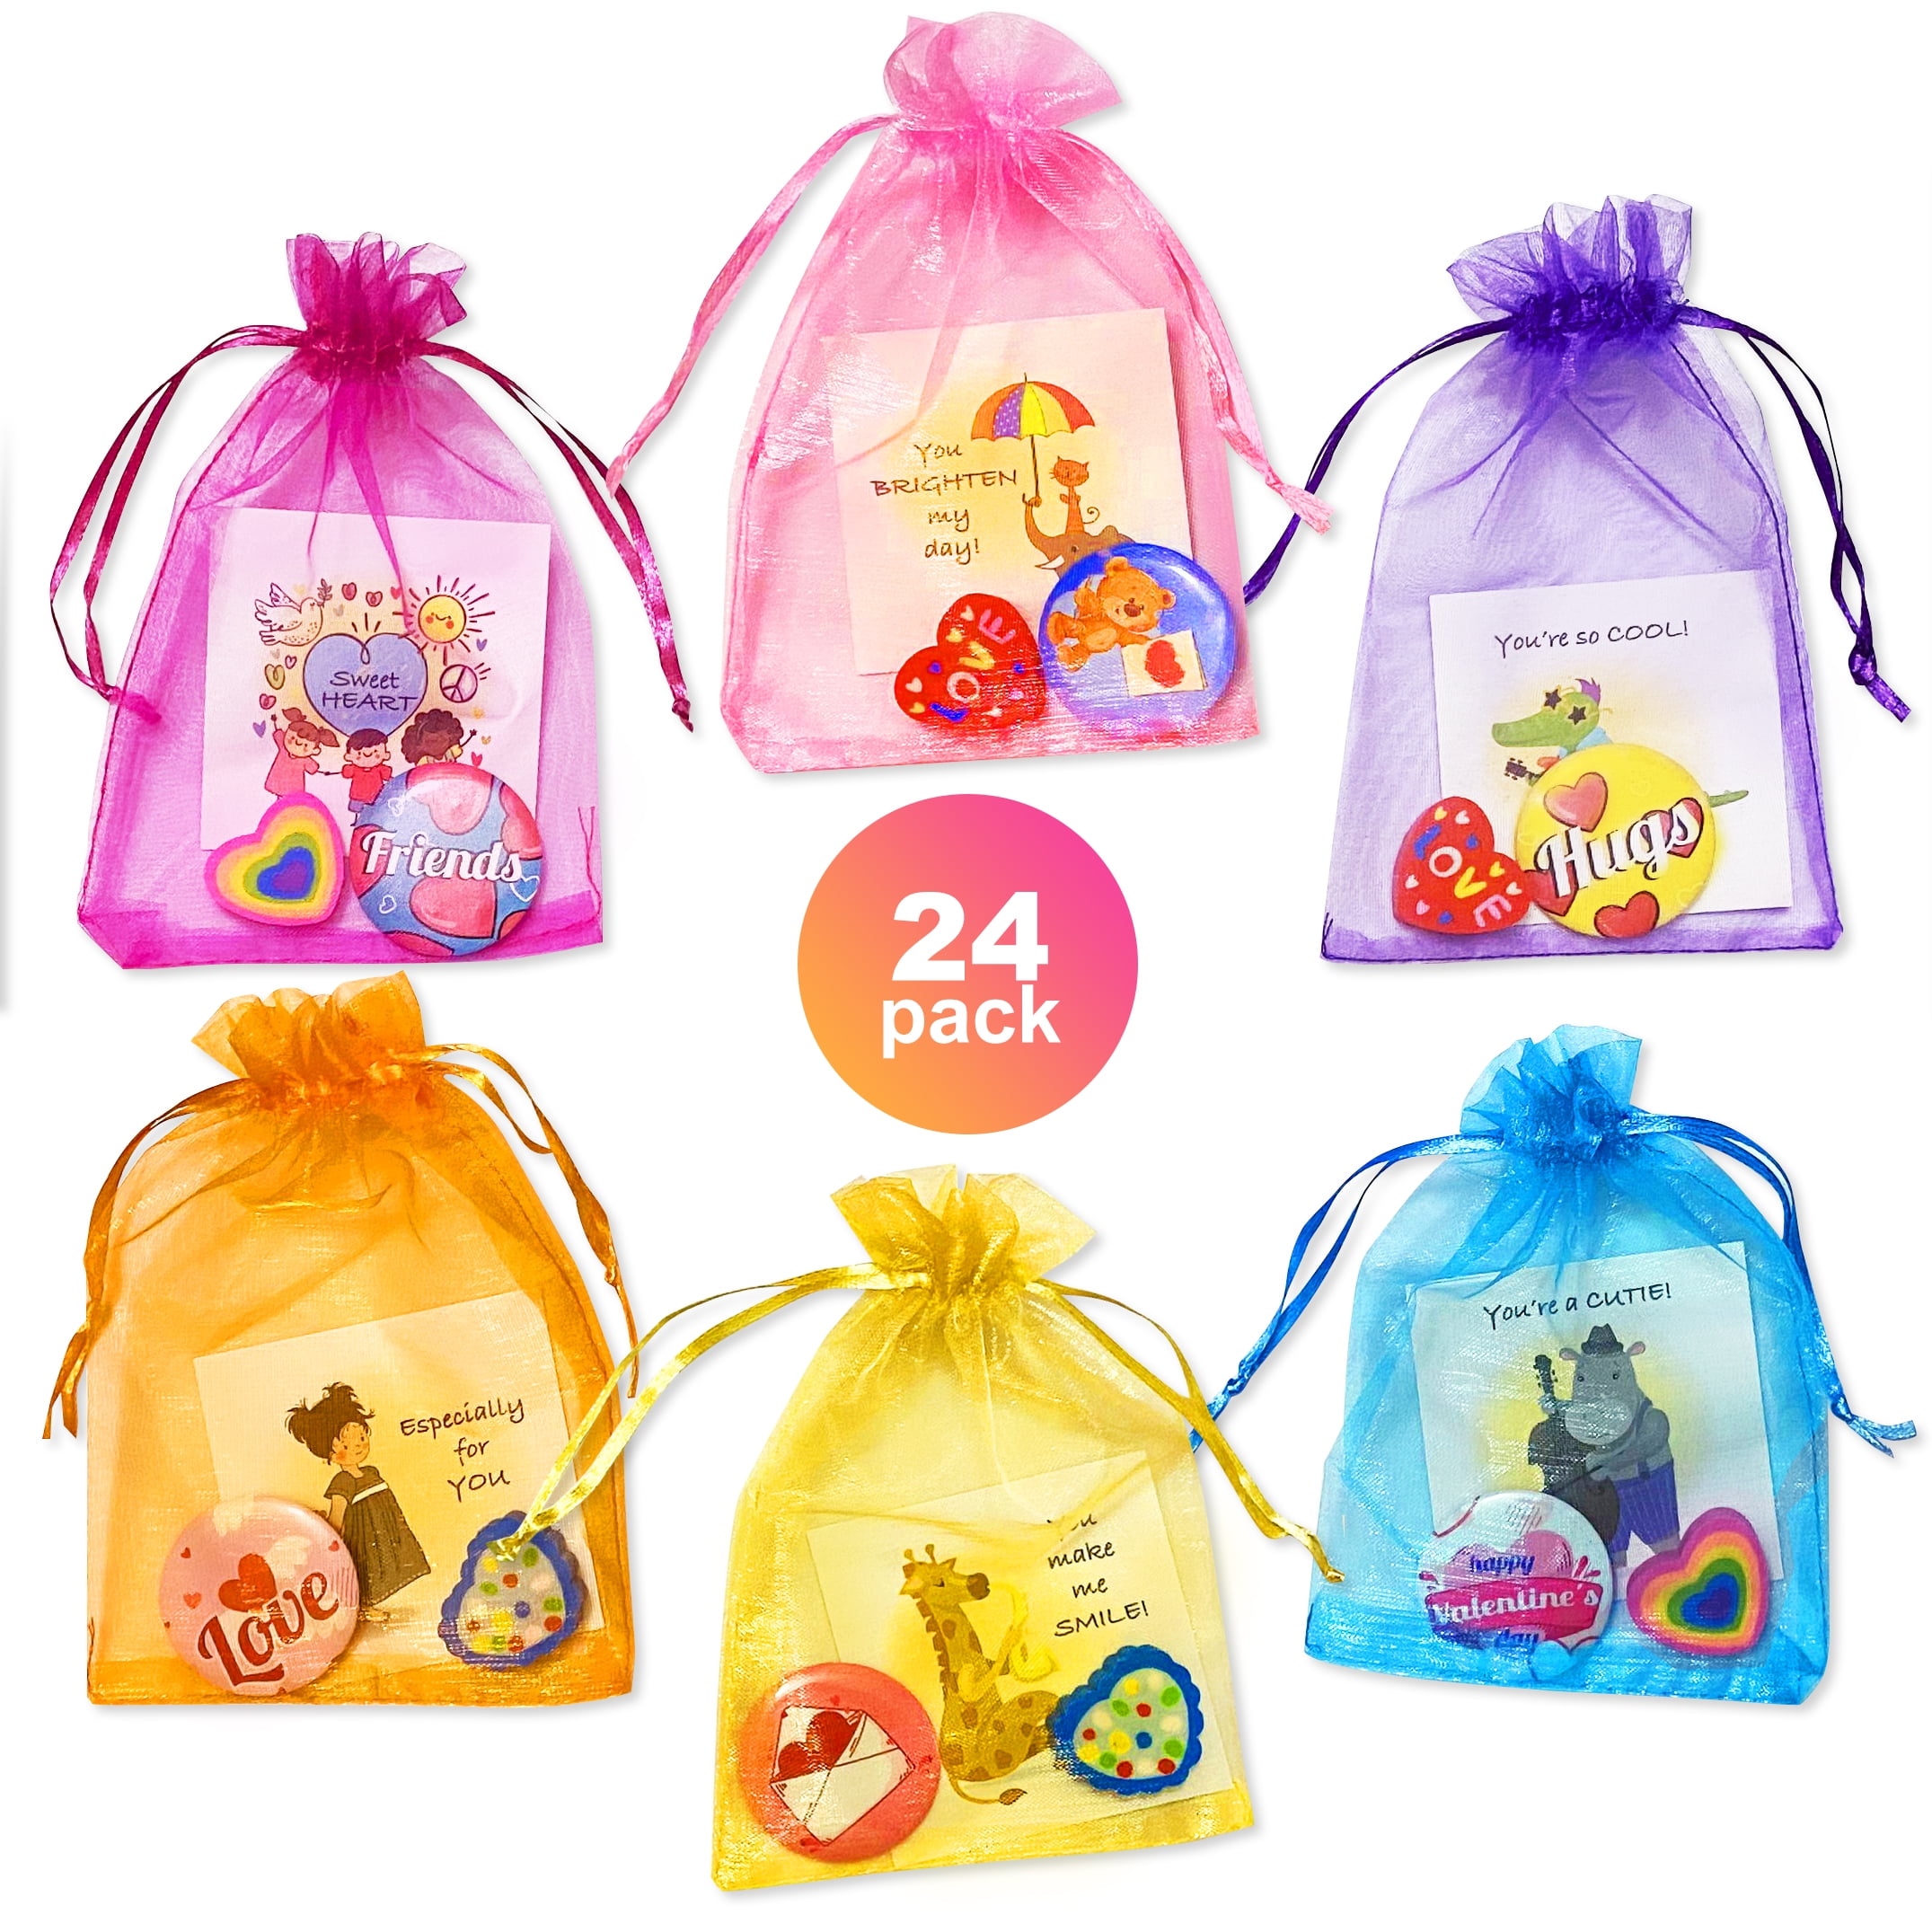 ASONA 28 Packs Valentines Day Gifts for Kids, Exchange Gifts for Classroom  School, Non-Candy Valentines Treat Good Bag Filles Party Favors Set